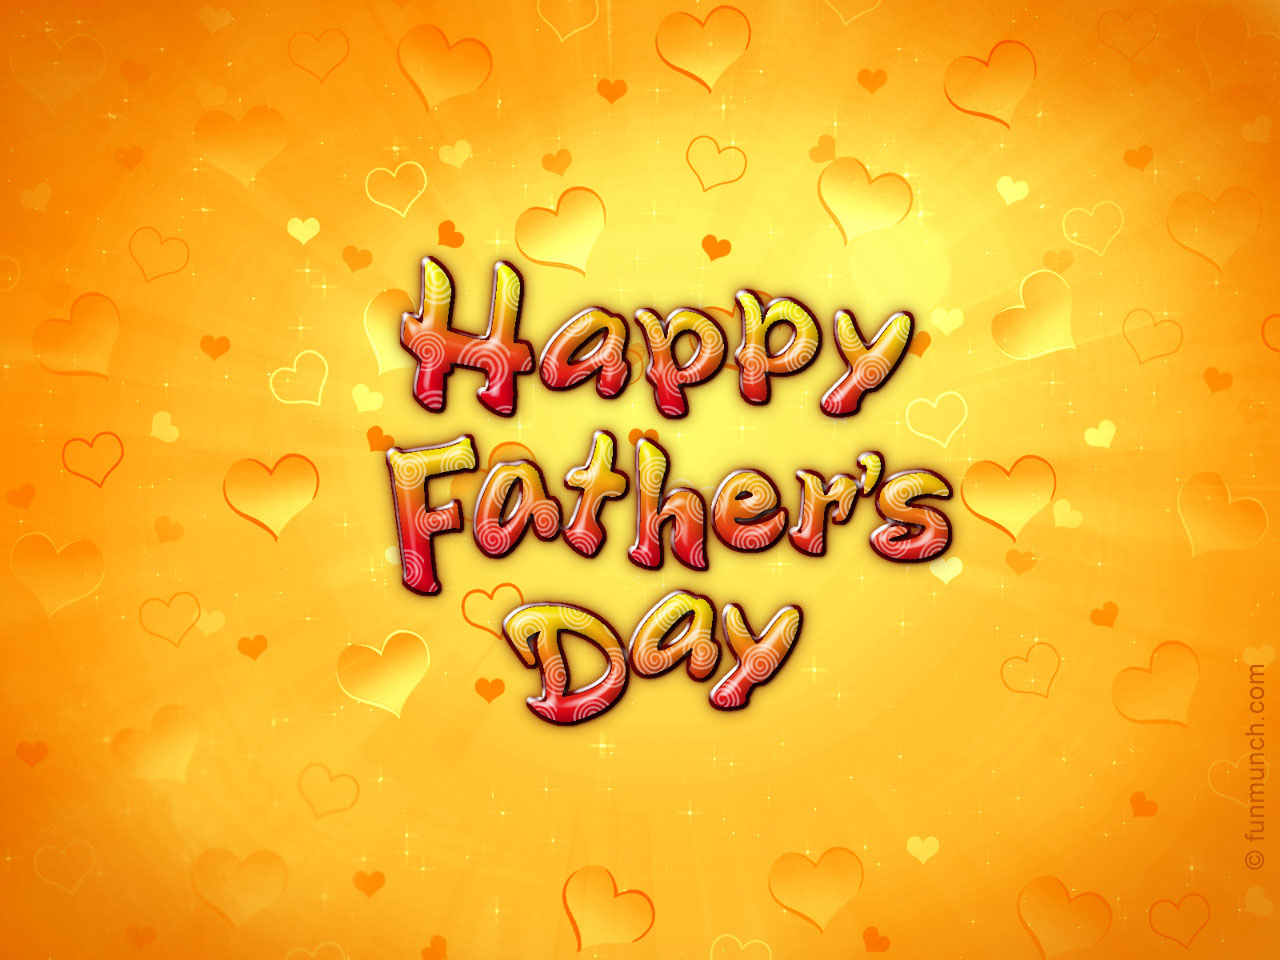 Happy Fathers Day 2014 Greeting Cards Free Images & Wallpapers ...